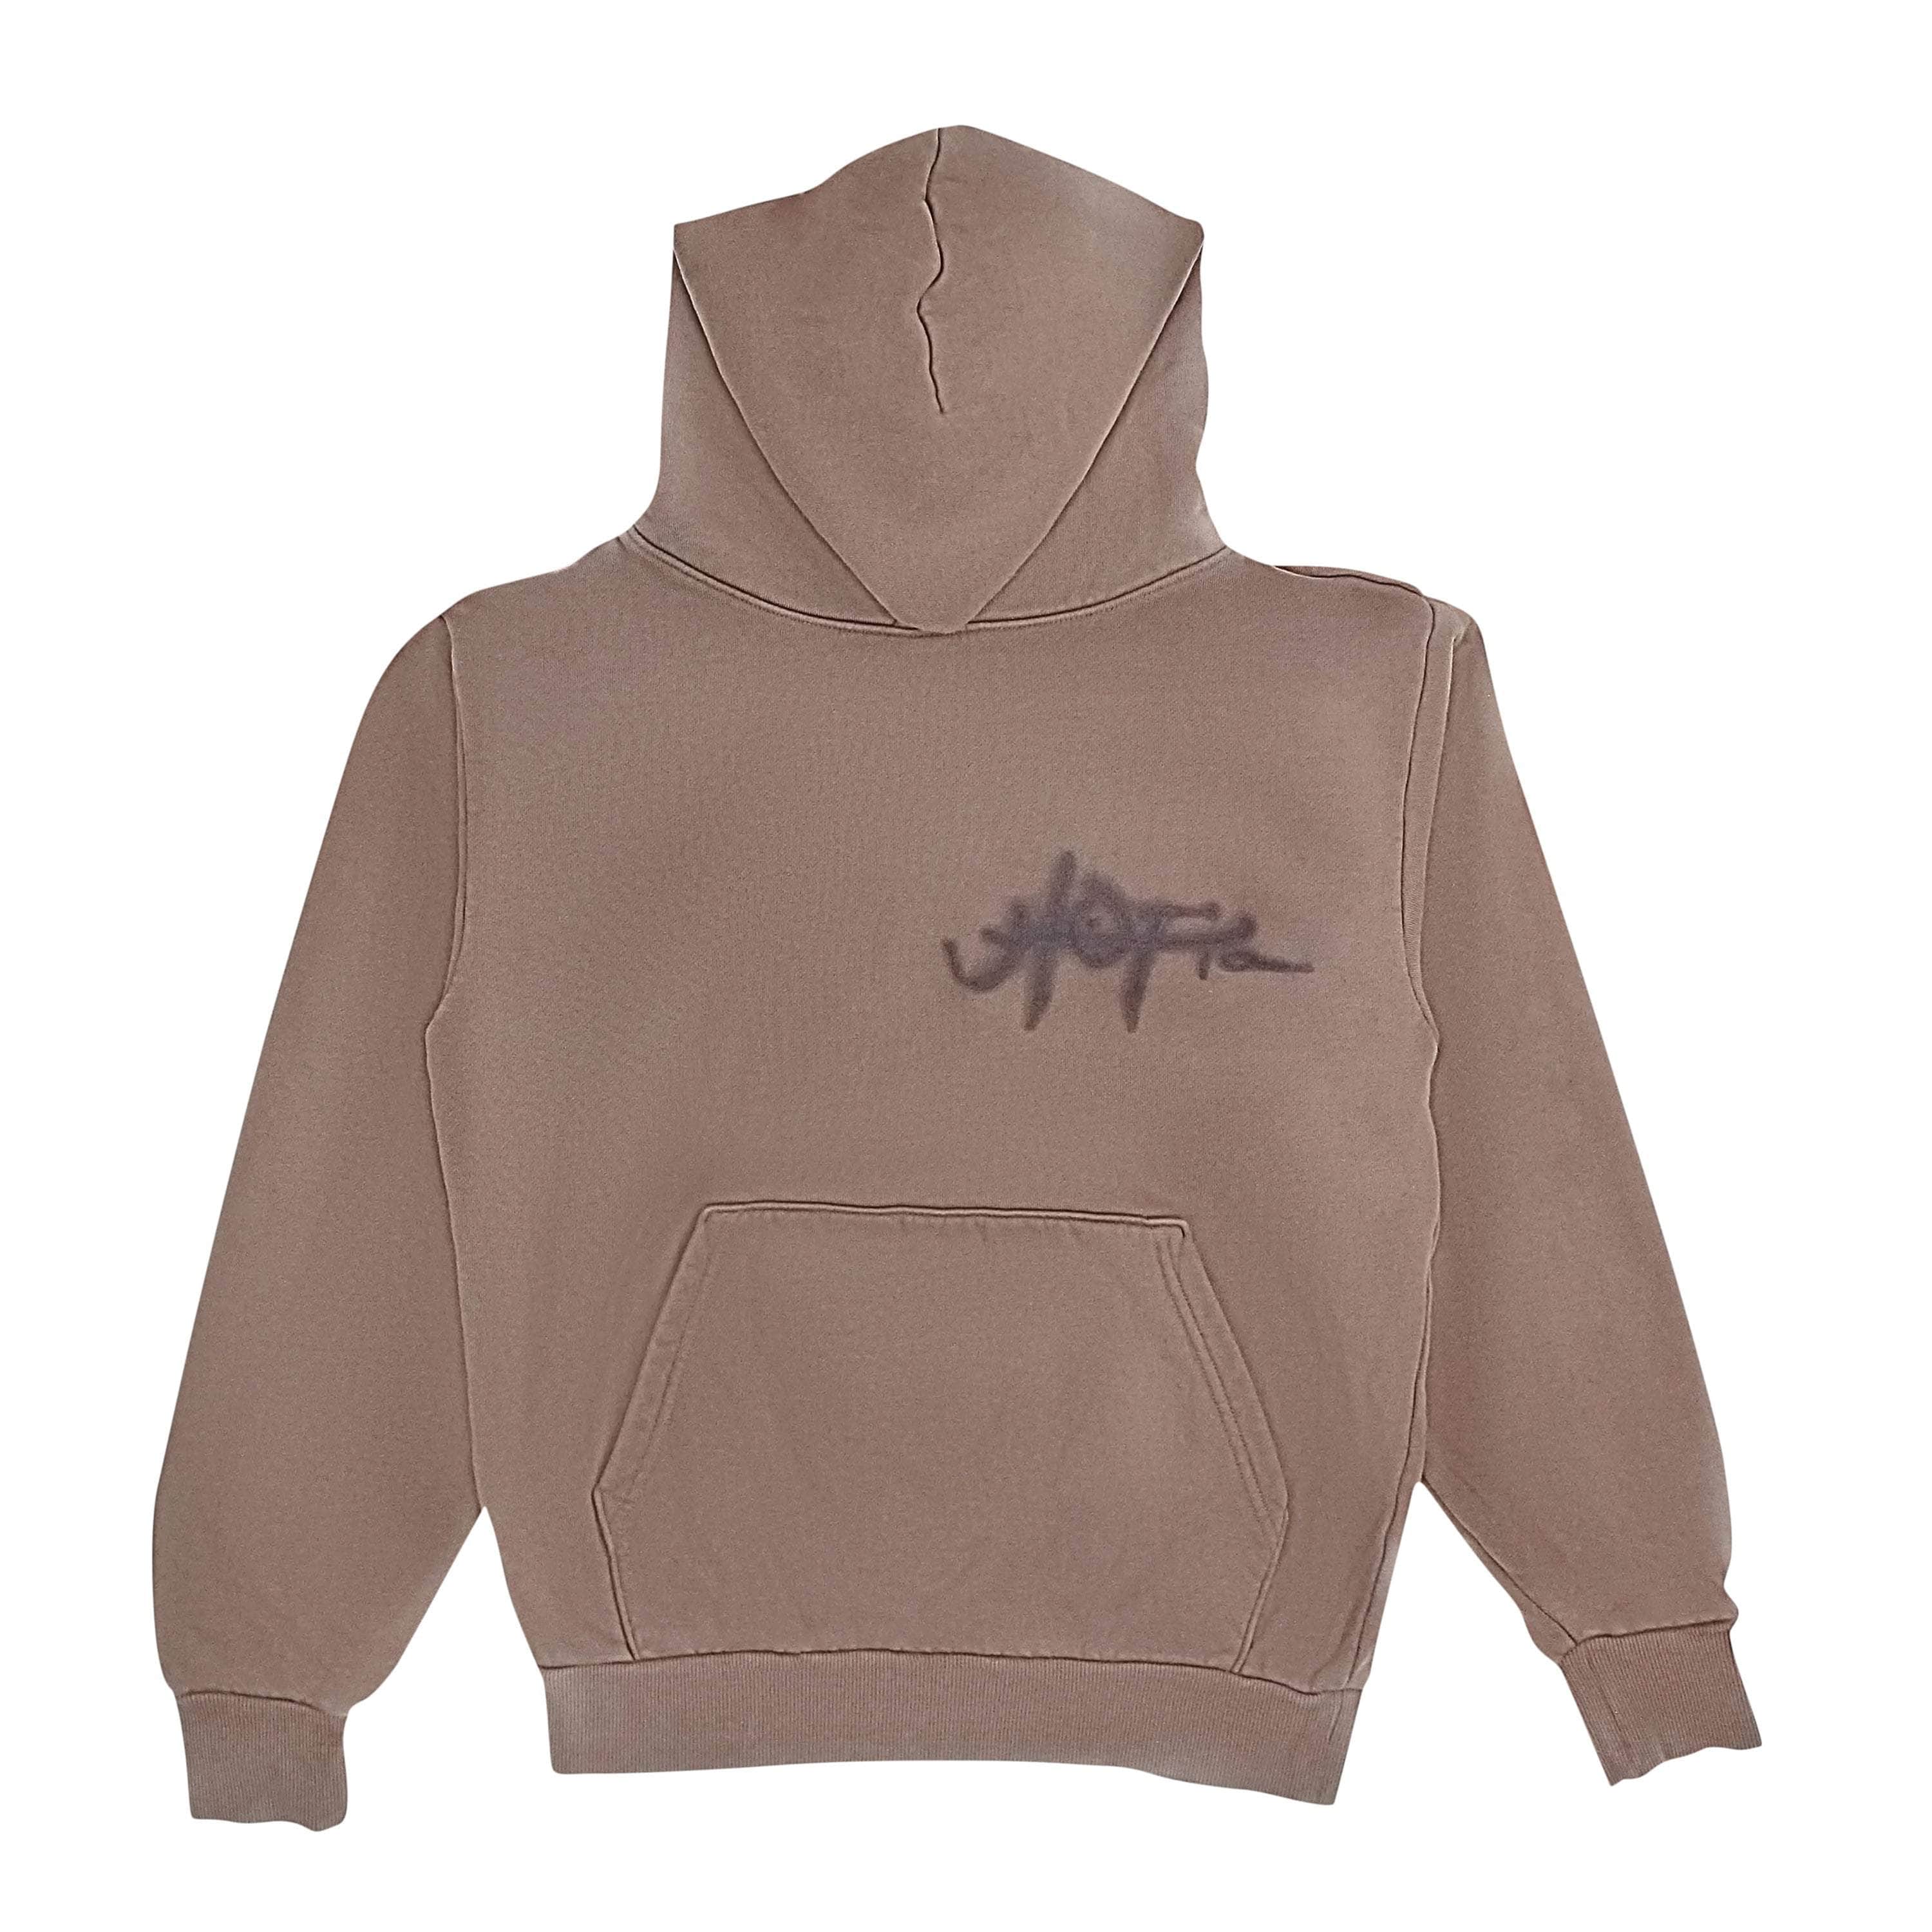 Travis Scott channelenable-all, chicmi, couponcollection, main-clothing, shop375, Stadium Goods, under-250 Brown A2 Hoodie